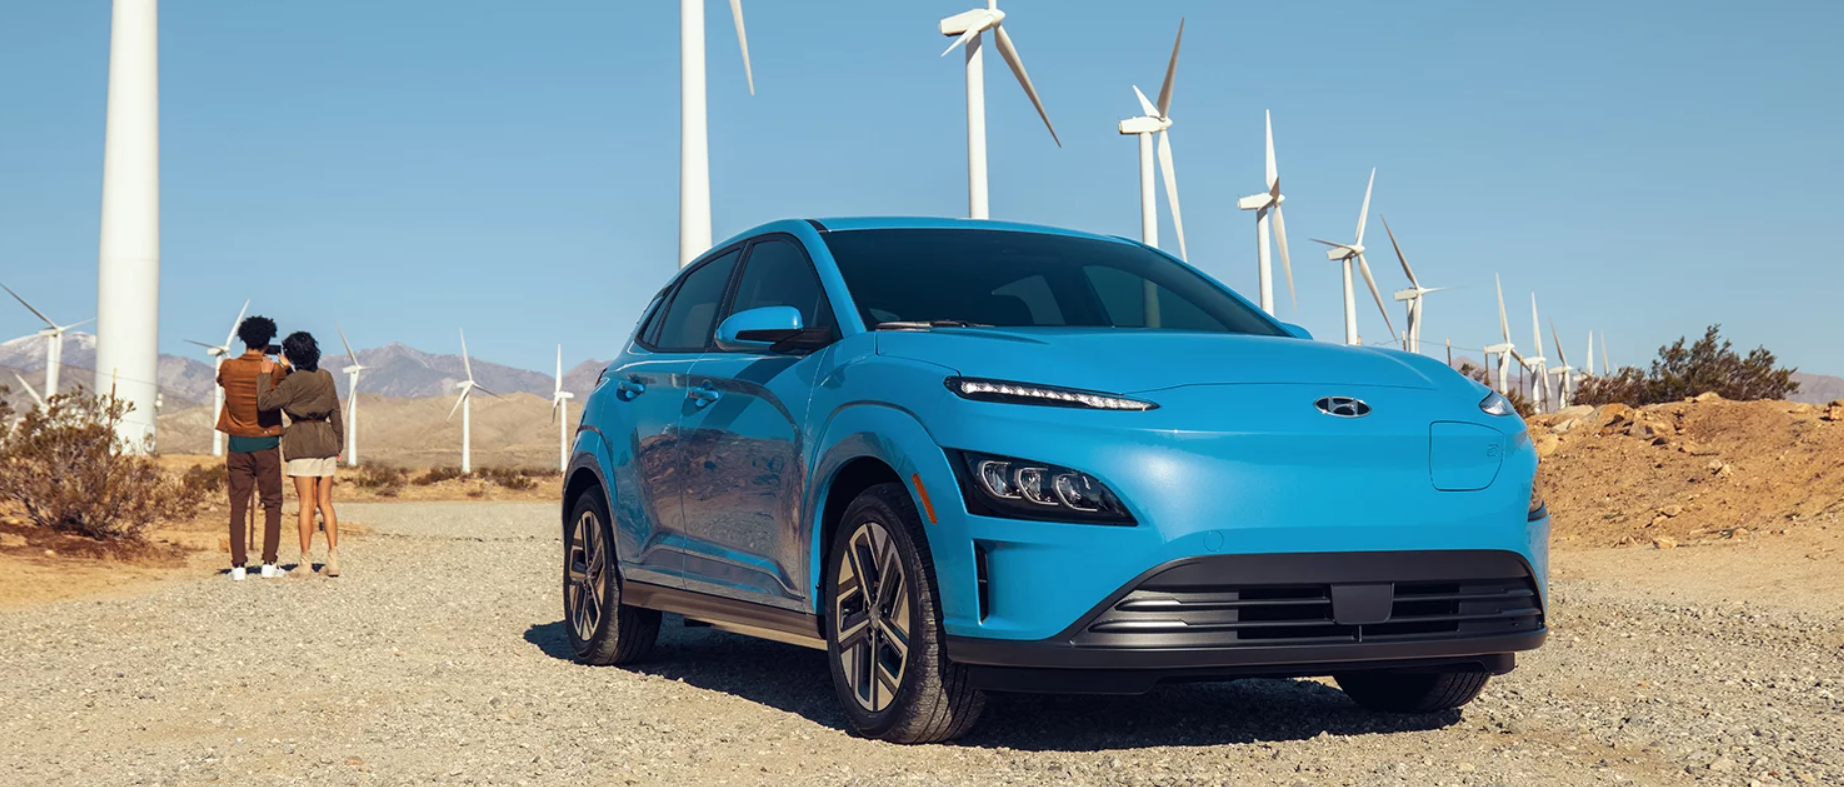 Everything You Need to Know About Charging the Hyundai Kona Electric